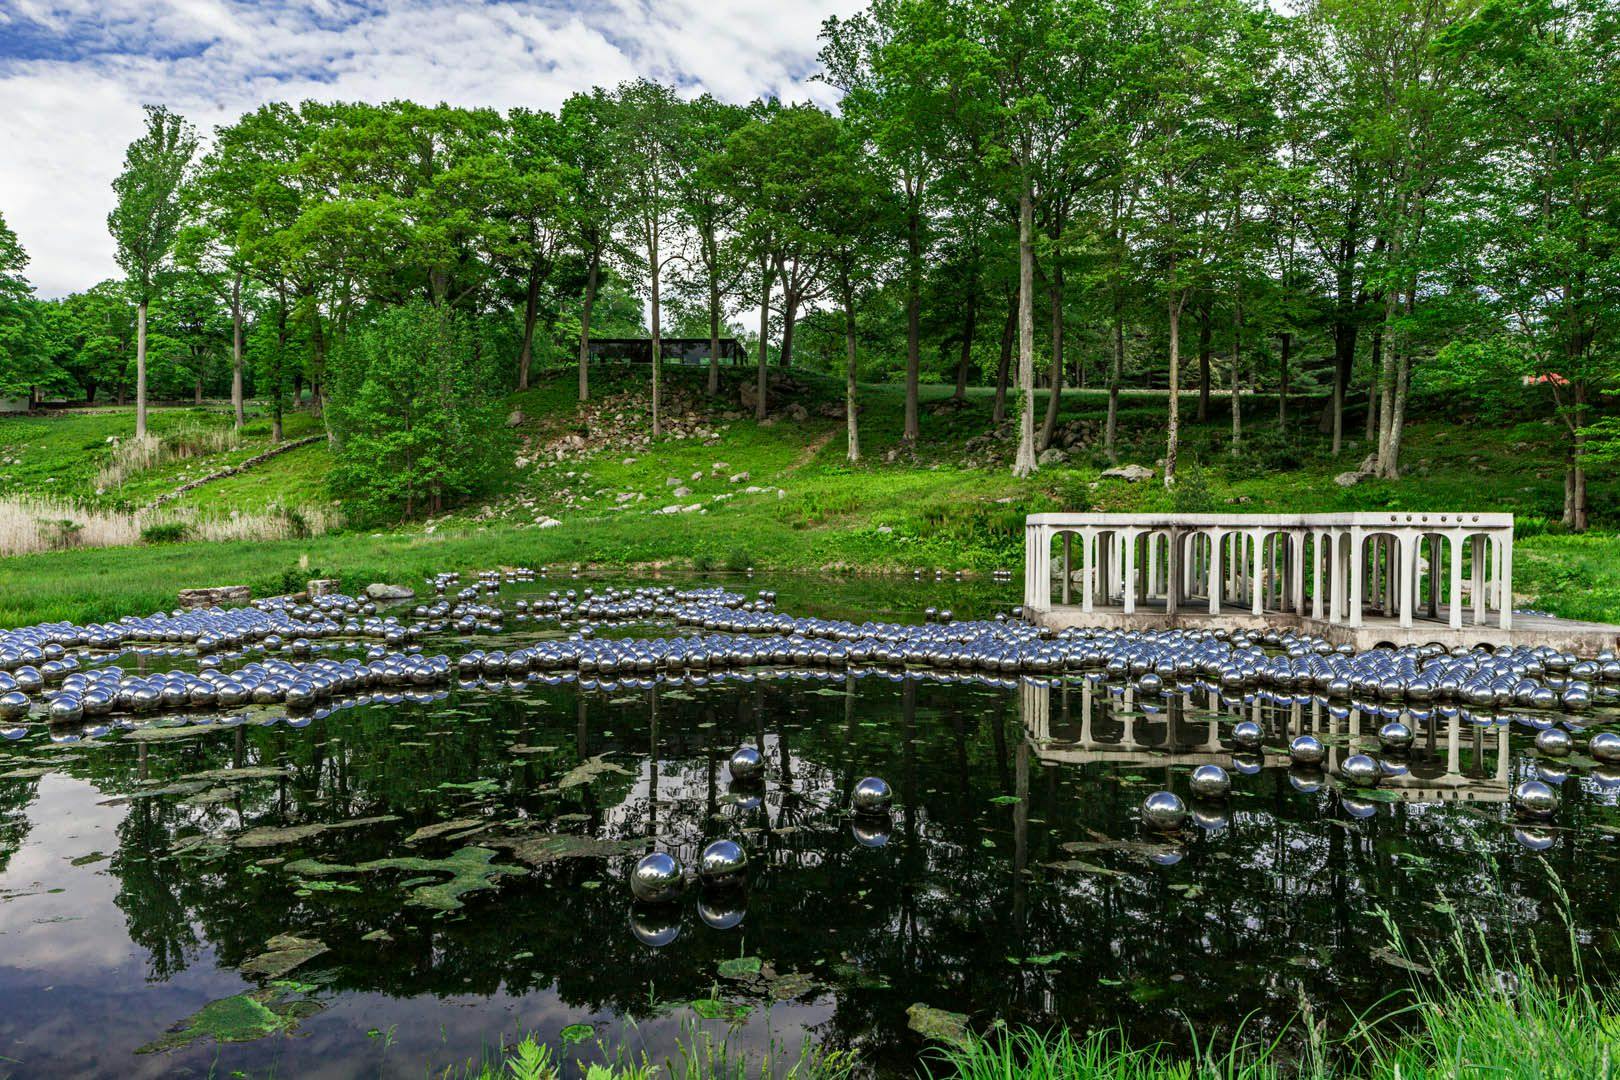 Installation view of the exhibition Yayoi Kusama: Narcissus Garden at the Philip Johnson Glass House in Connecticut, dated 2016.